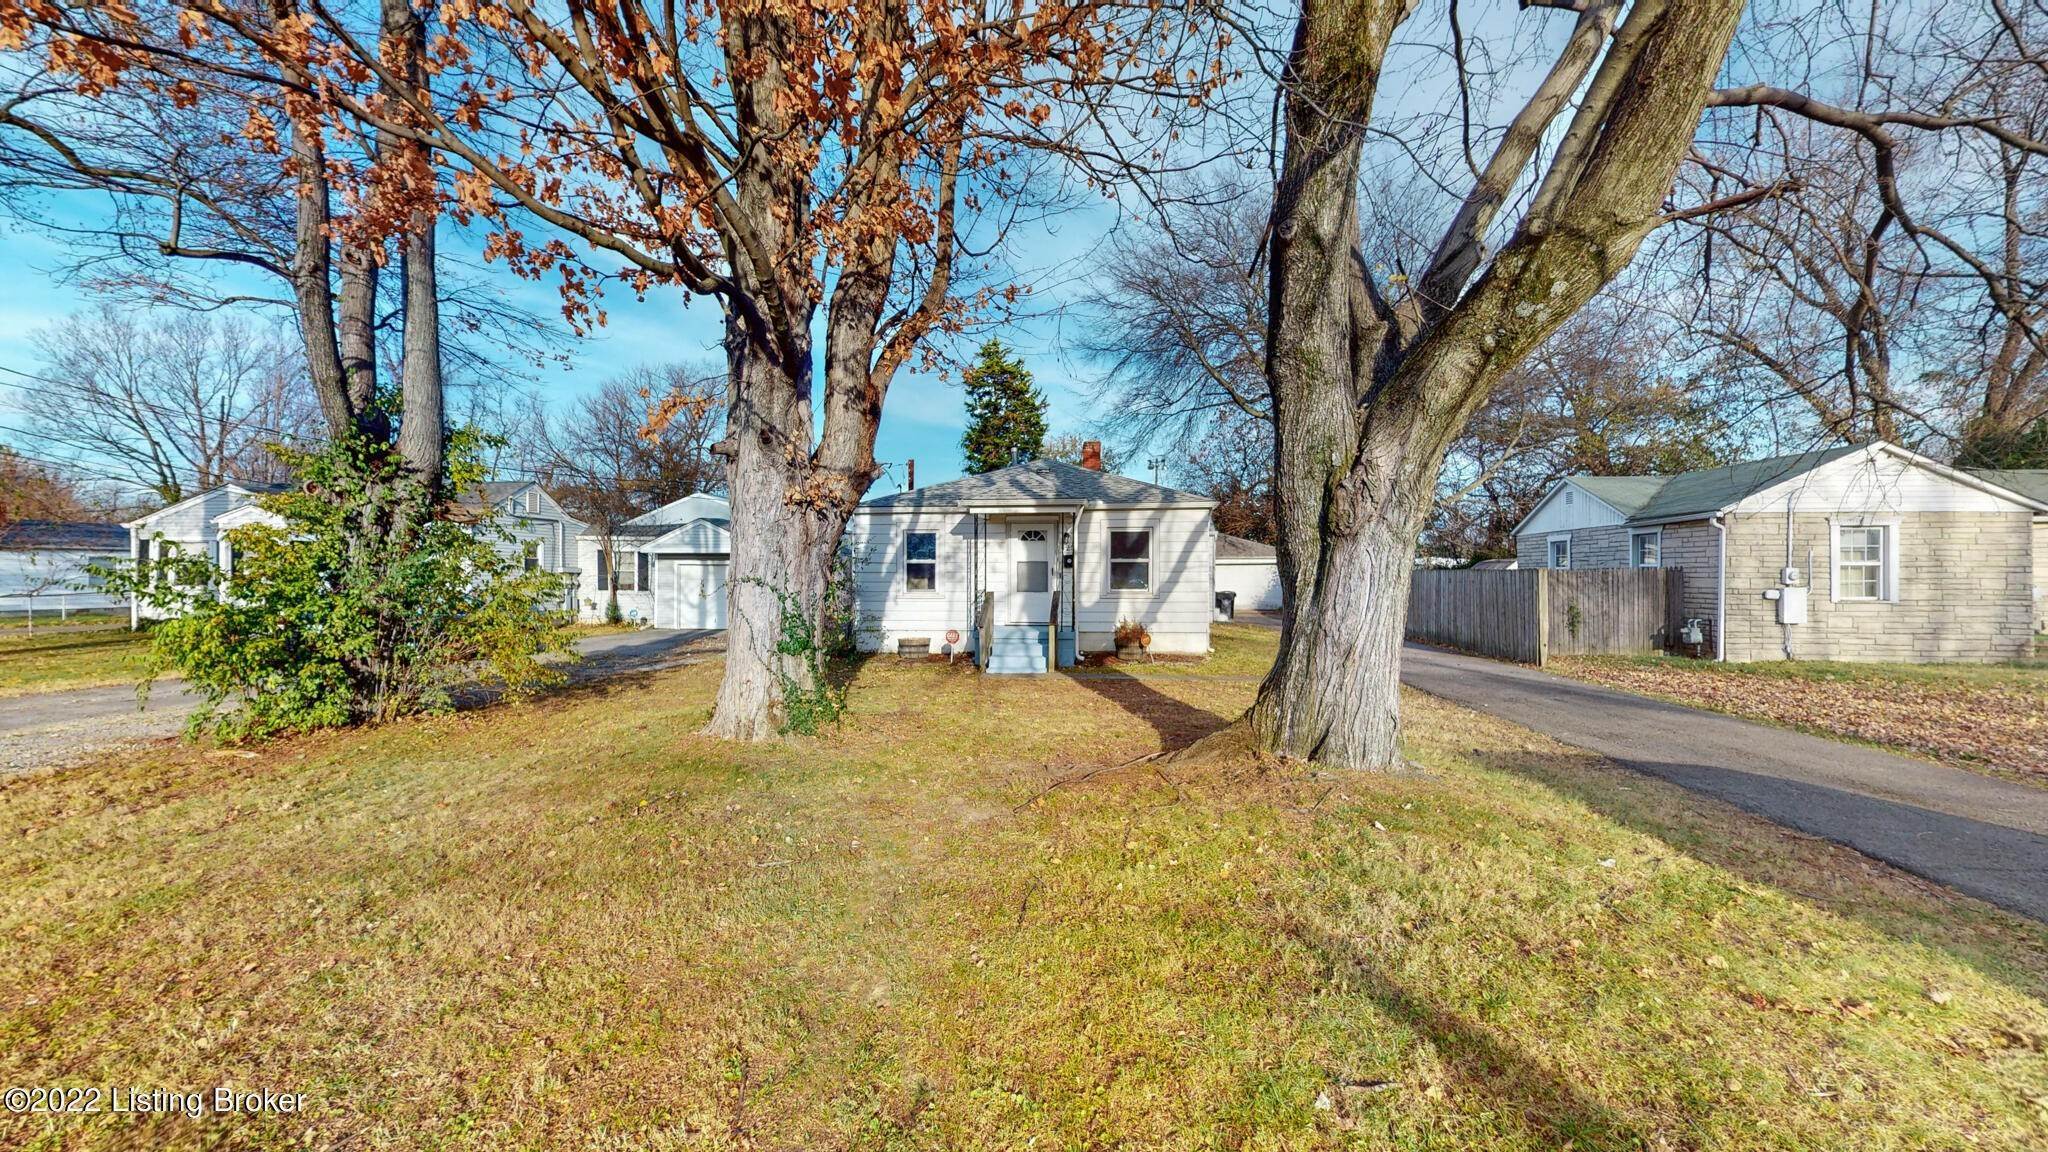 26. Single Family at Louisville, KY 40213